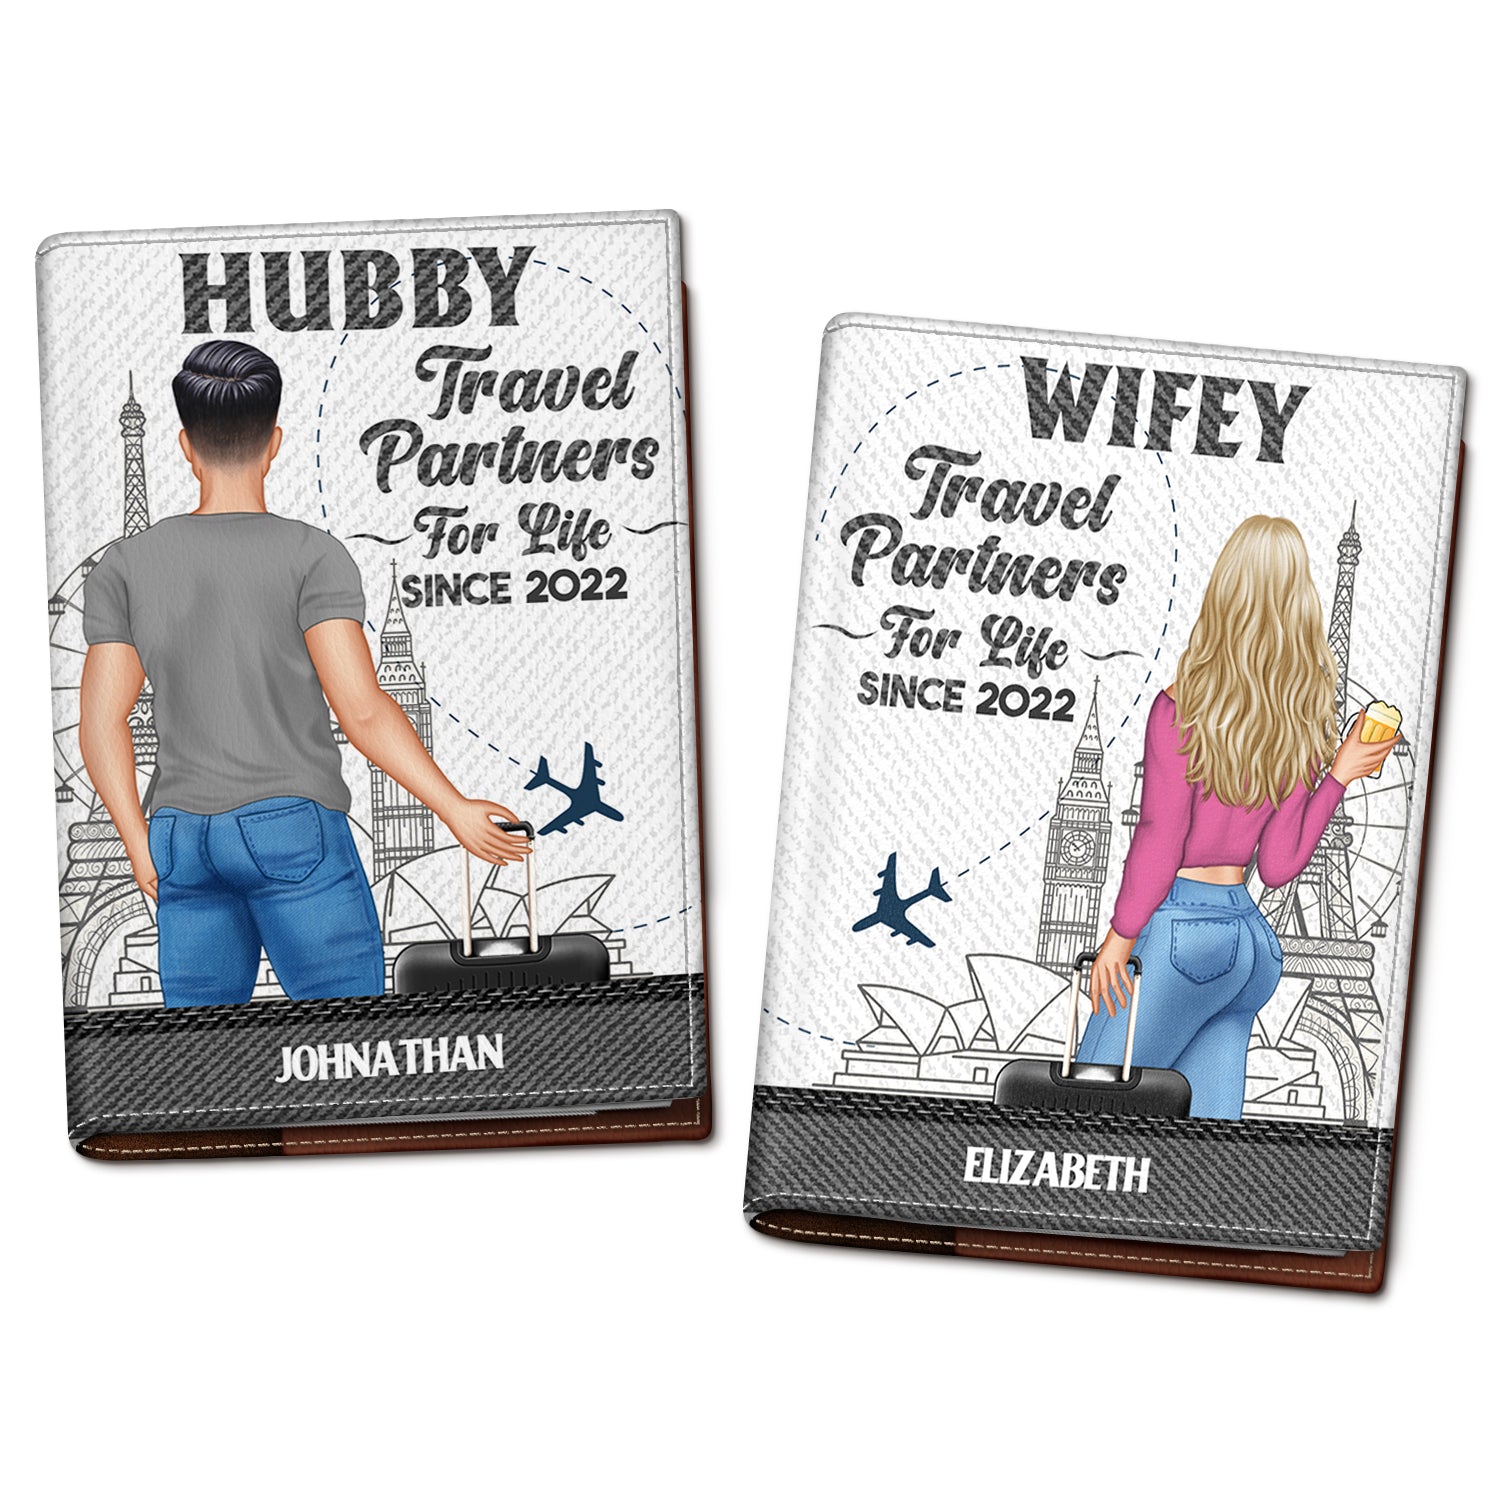 Traveling Couple Hubby & Wifey Travel Partners For Life - Gift For Couples, Traveling Gift - Personalized Passport Cover, Passport Holder